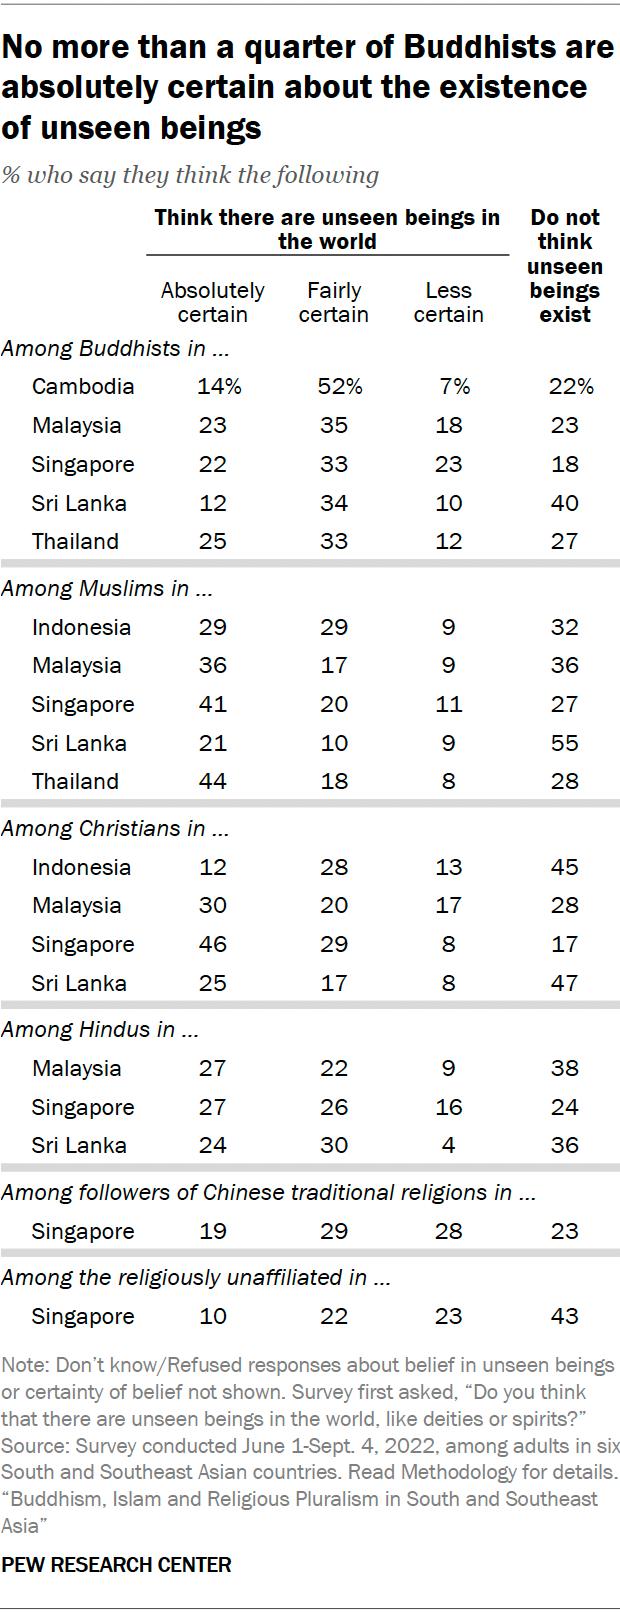 A table showing that No more than a quarter of Buddhists are absolutely certain about the existence of unseen beings